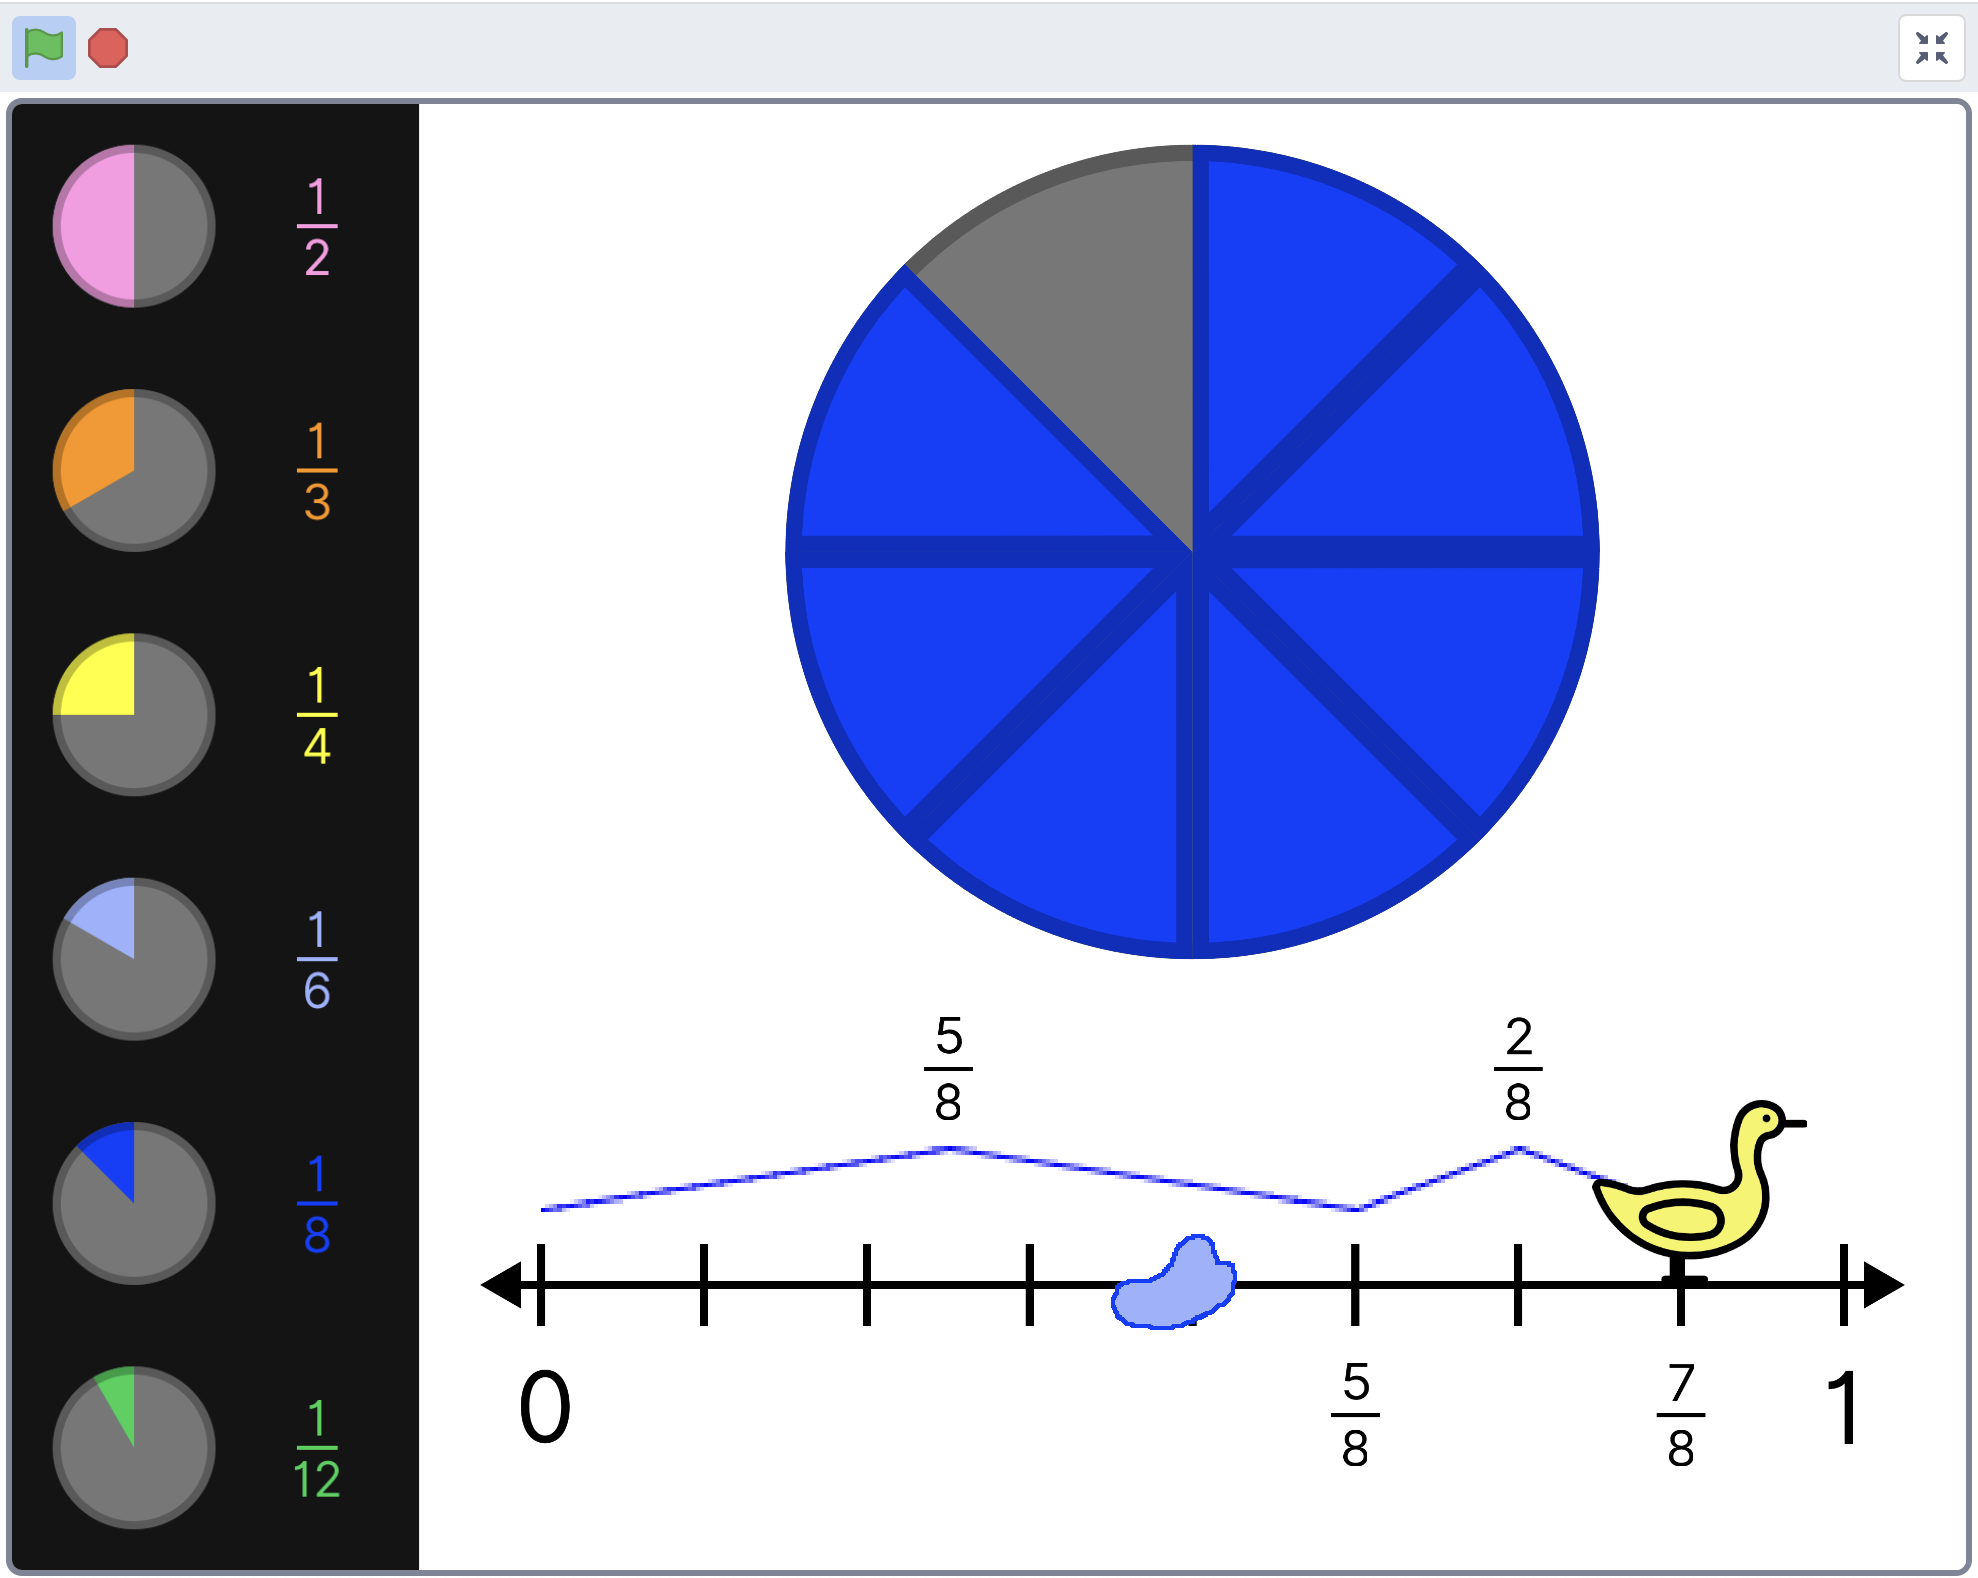 Scratch project stage depicting a large pie graph divided into eighths with one piece missing. A number line with a duck on it is below the pie graph. Several smaller pie graphs appear to the left displaying common fractions.